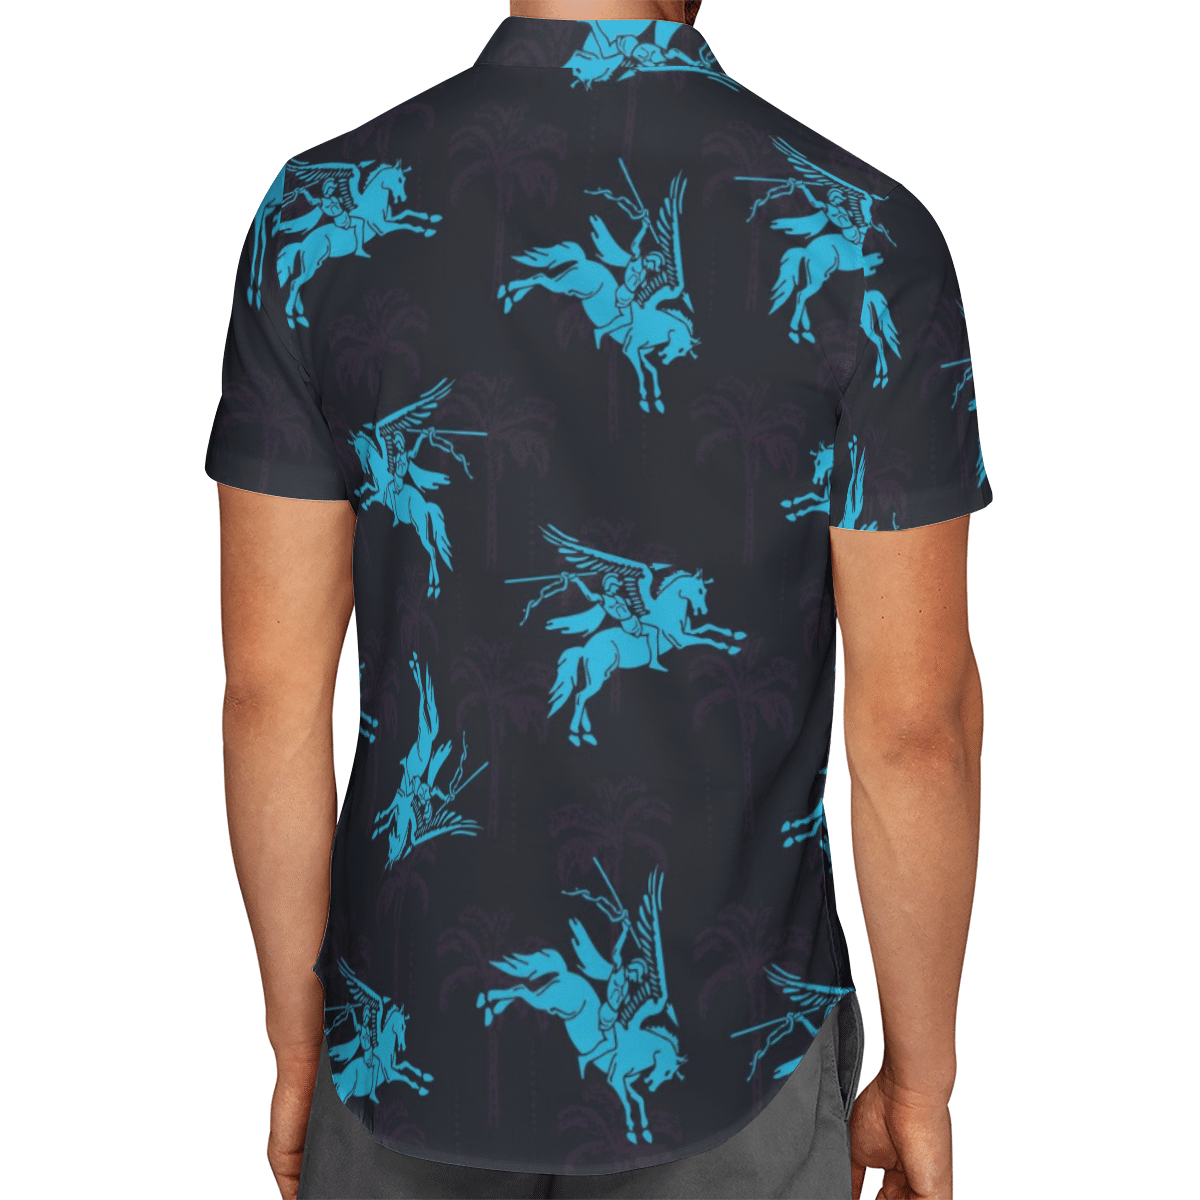 Going to the beach with a quality shirt 159